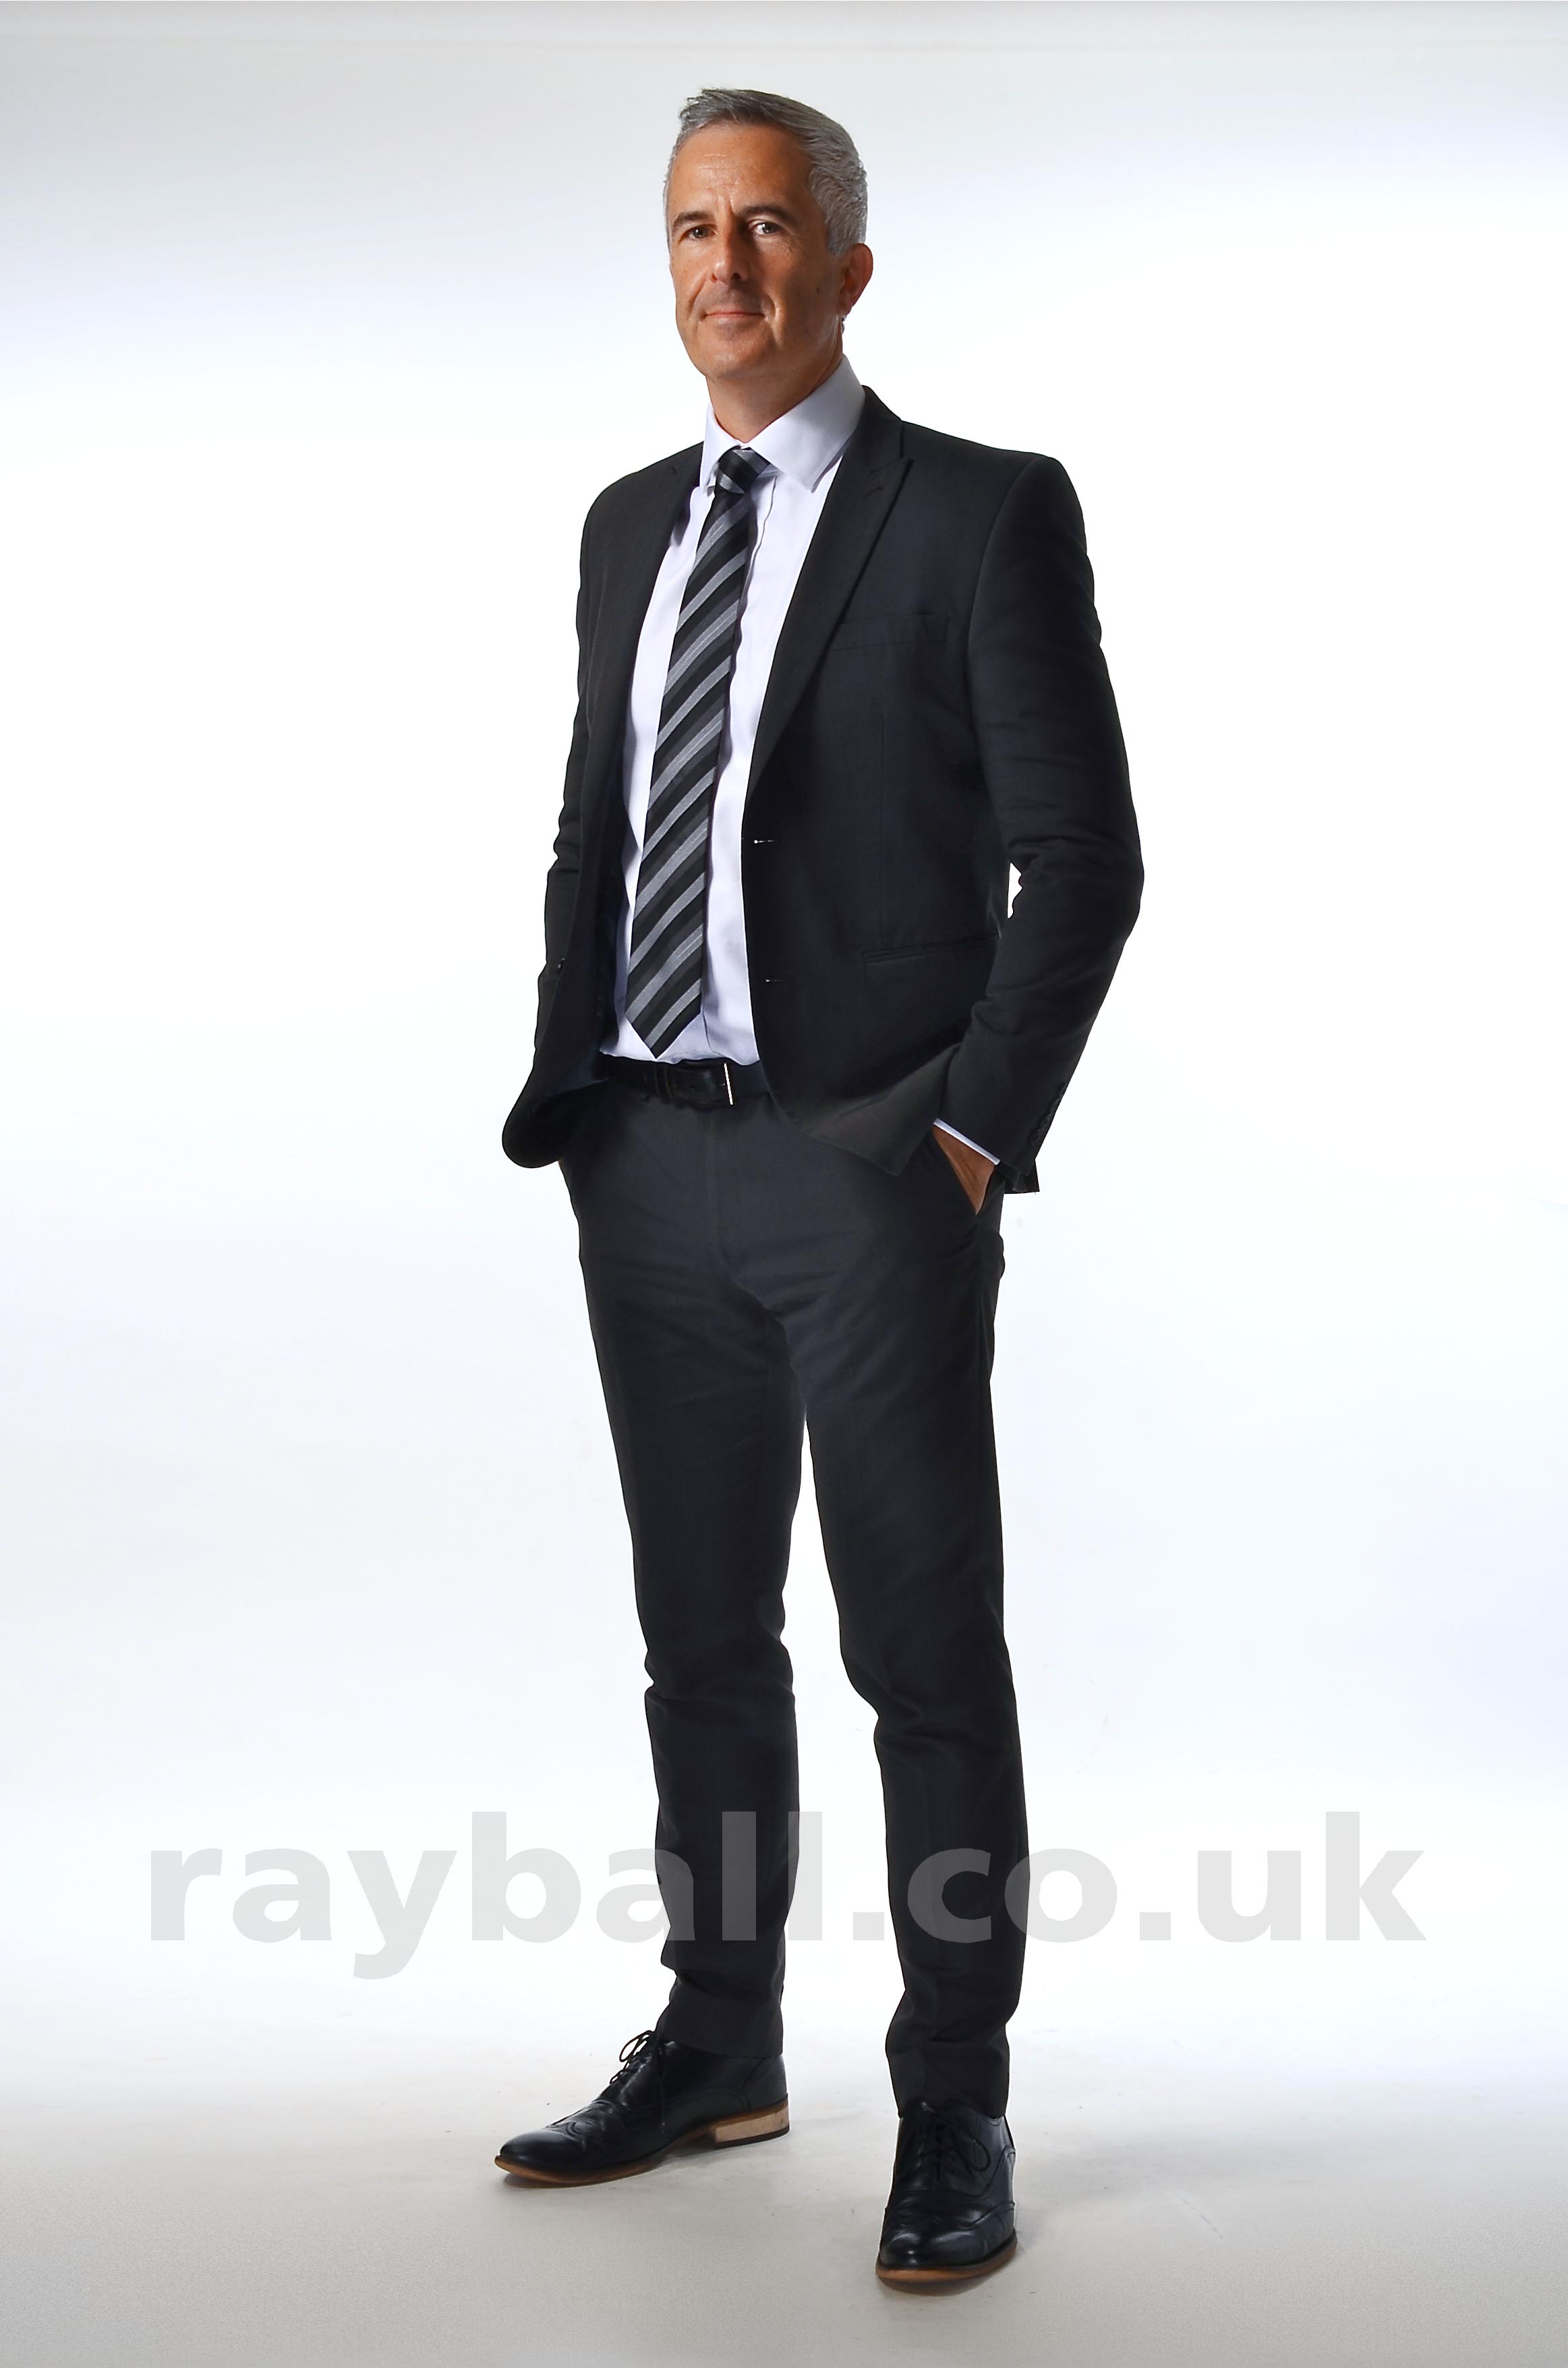 Corporate portrait of fellow from Fetcham Surrey.